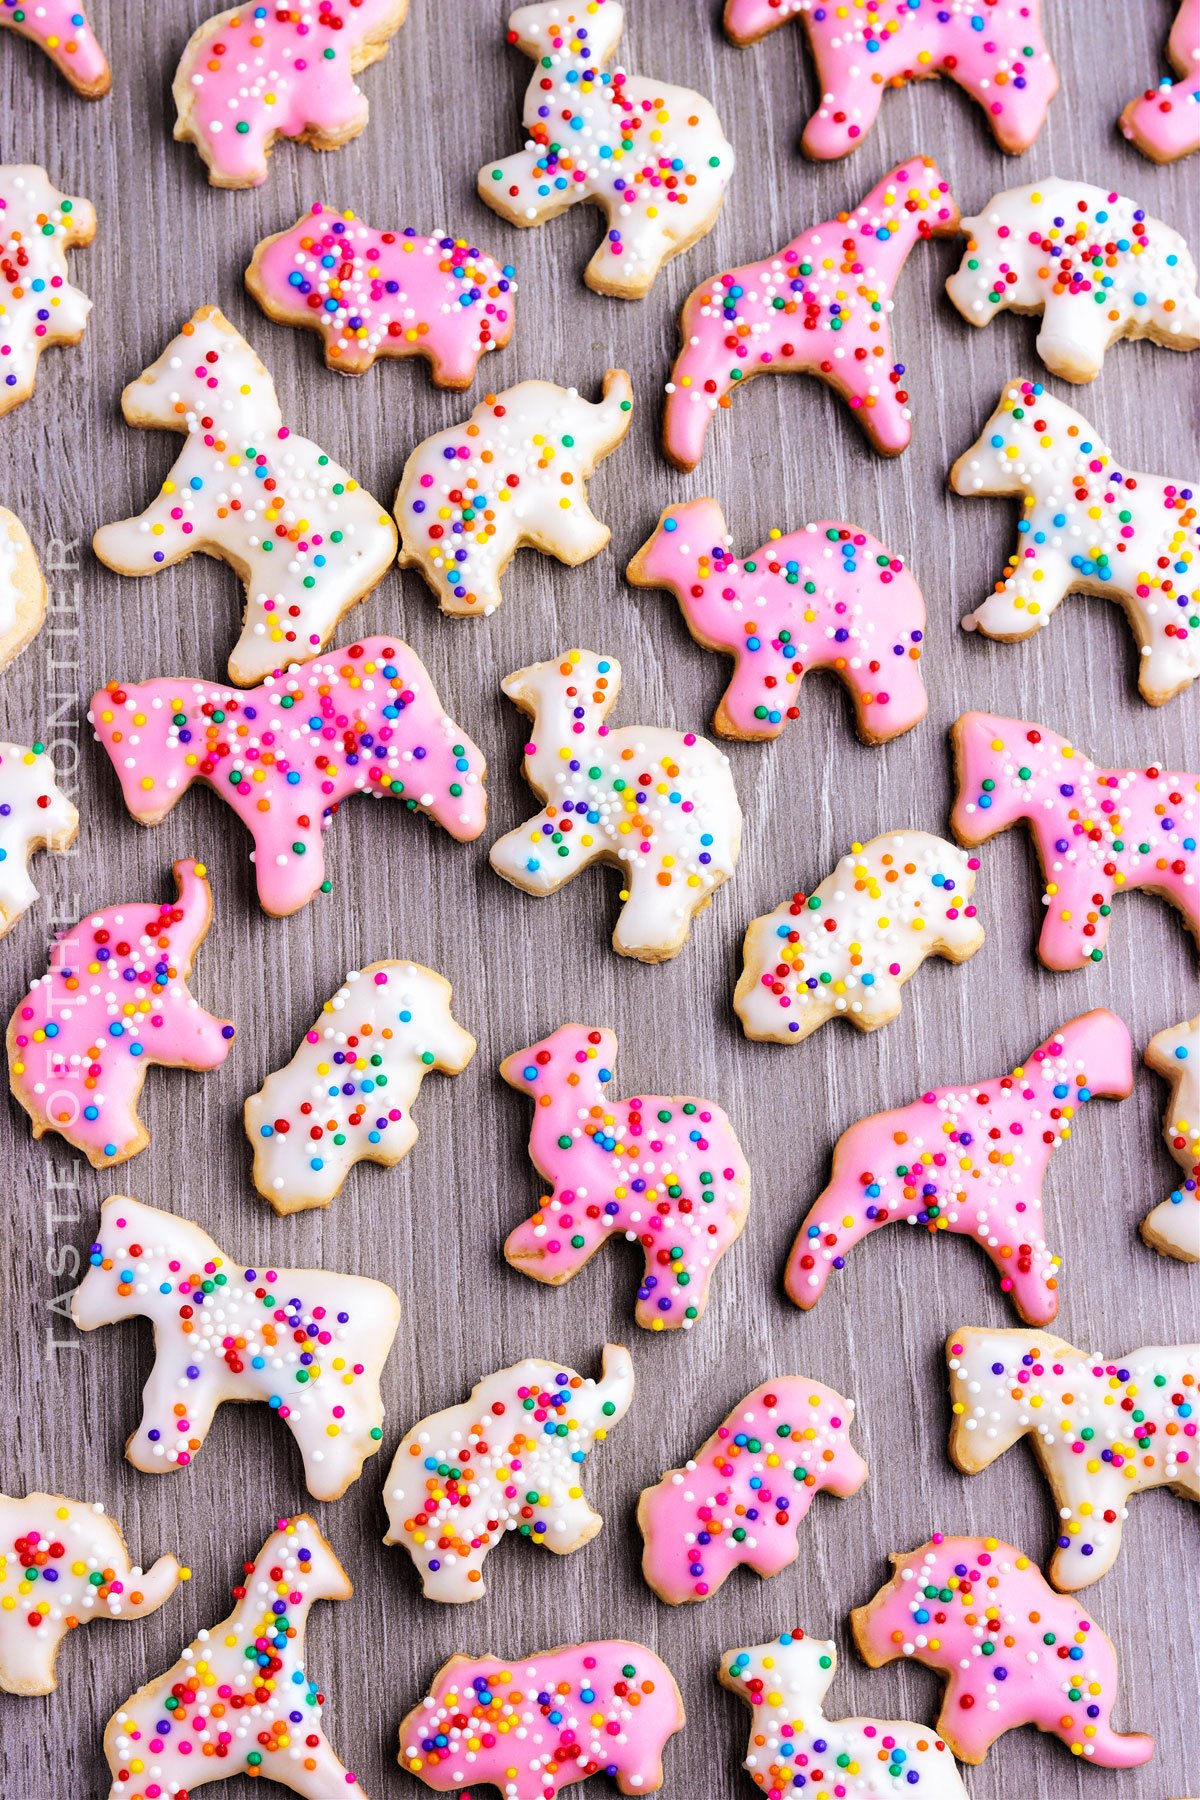 Copycat Frosted Animal Cookies Recipe